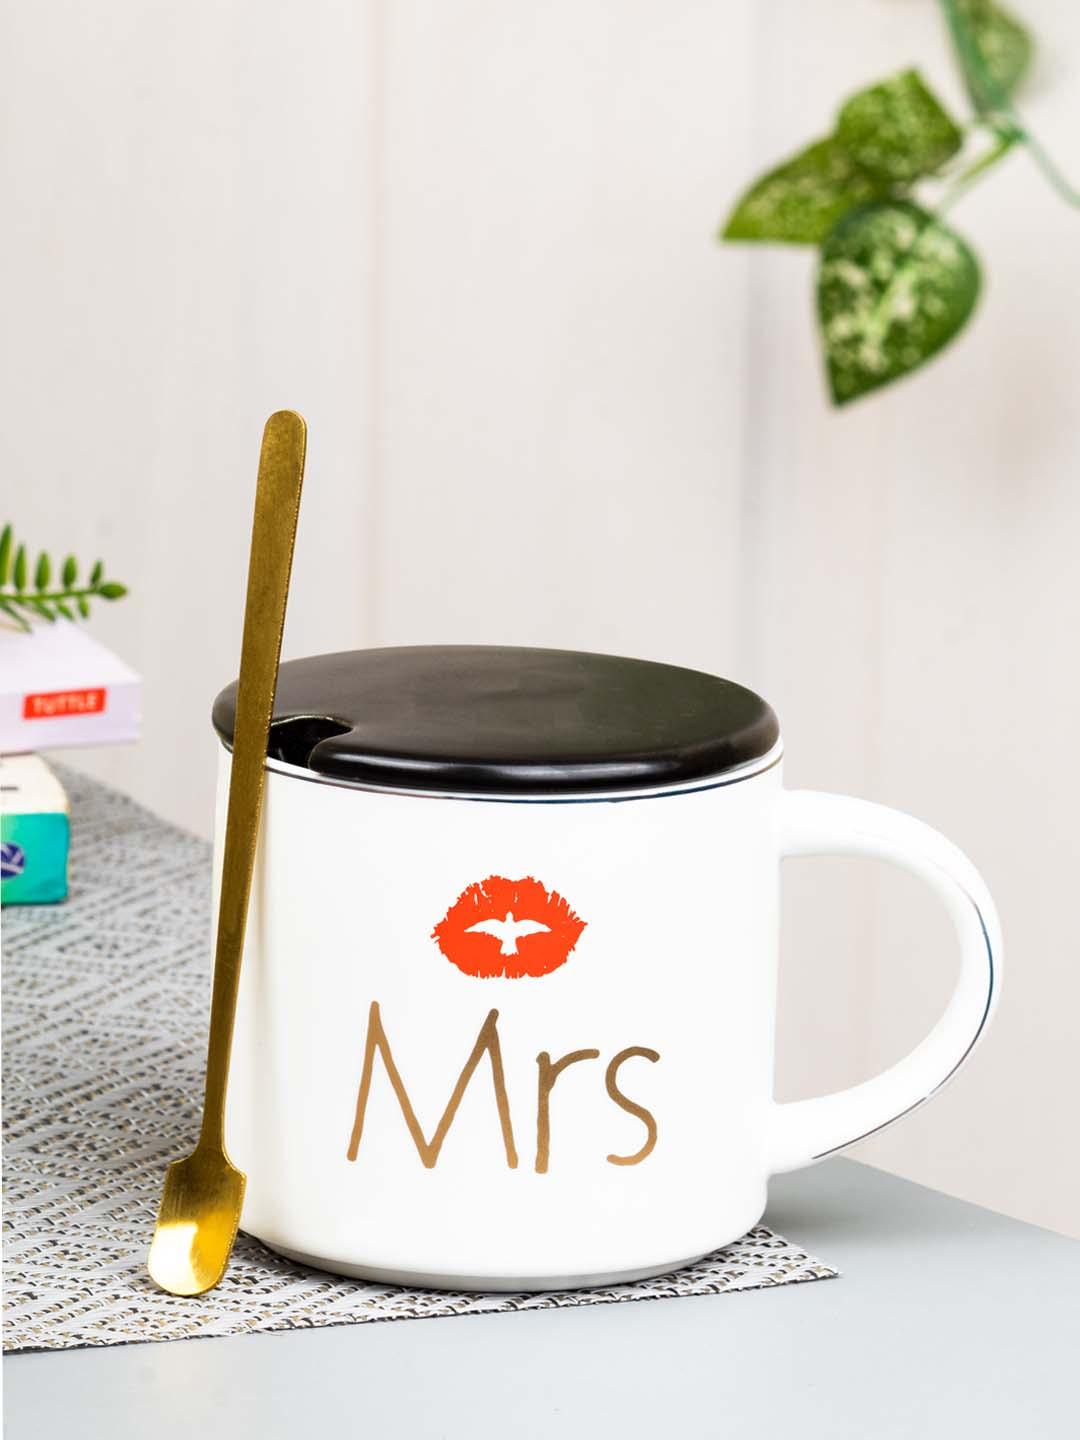 Mr. and Mrs. Coffee Mugs - Perfect Pair for Morning Brews